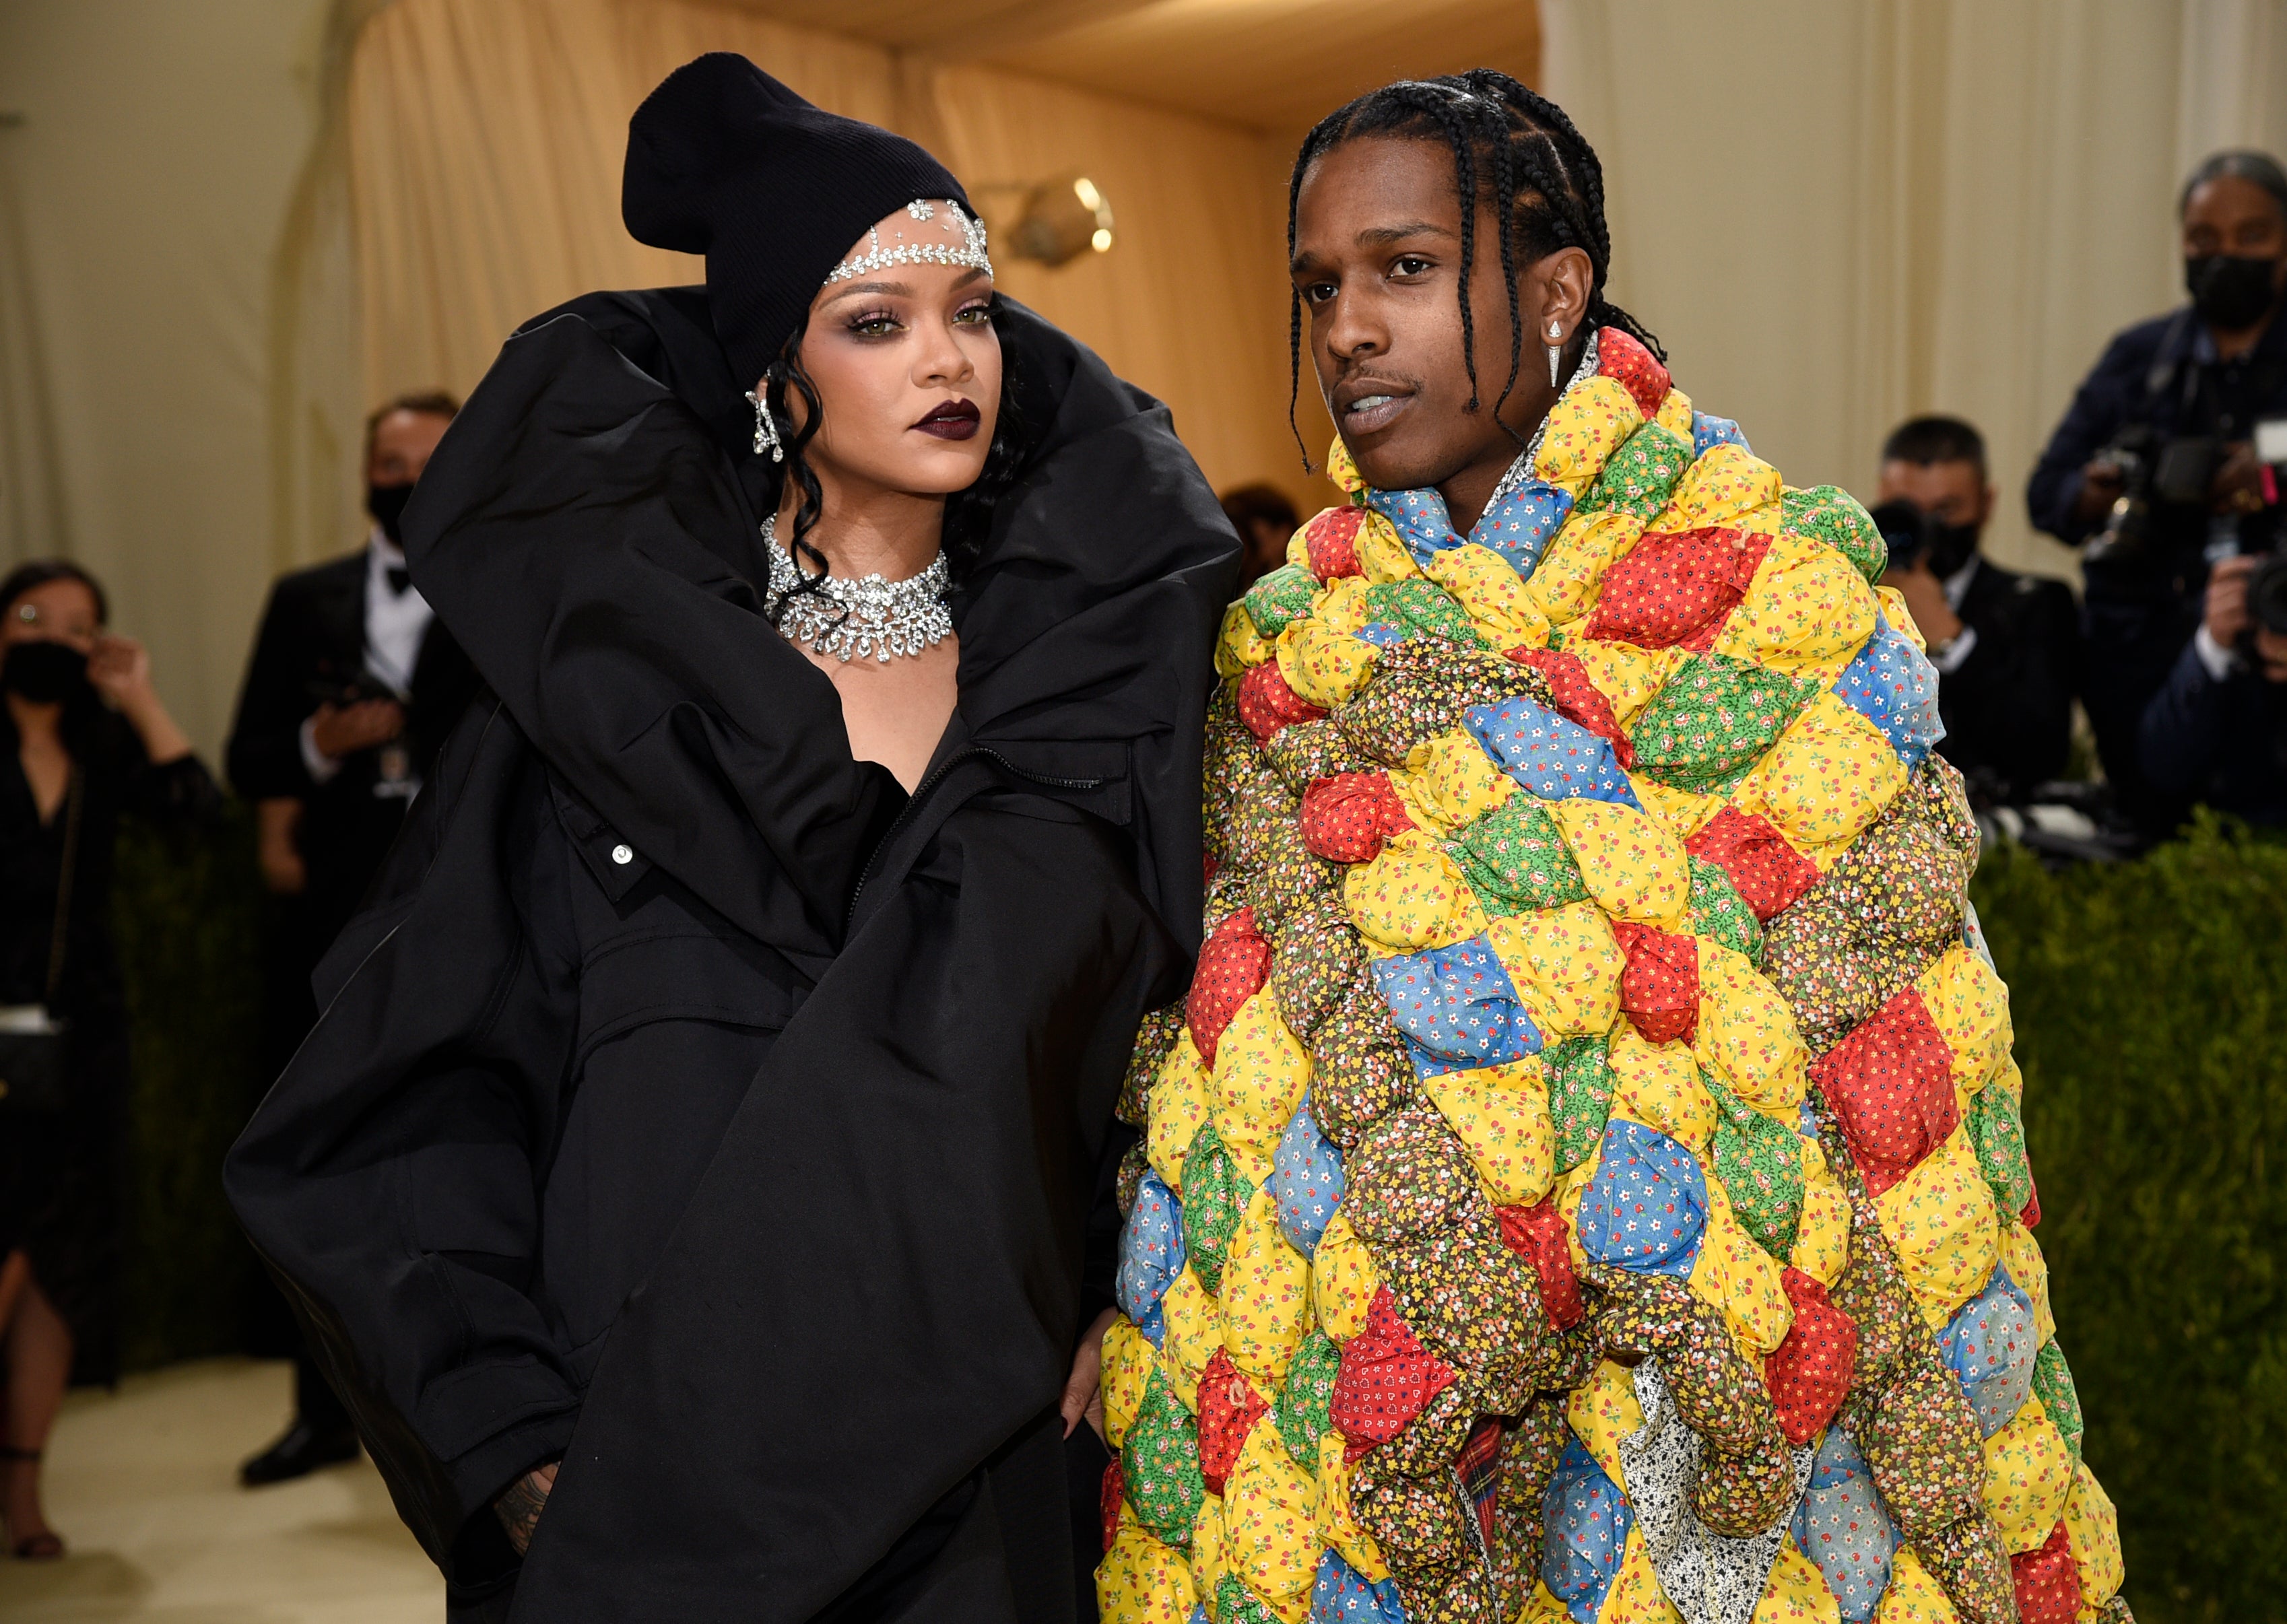 Rihanna and Asap Rocky arrived fashionably late to the Met Gala (Evan Agostini/Invision/AP)